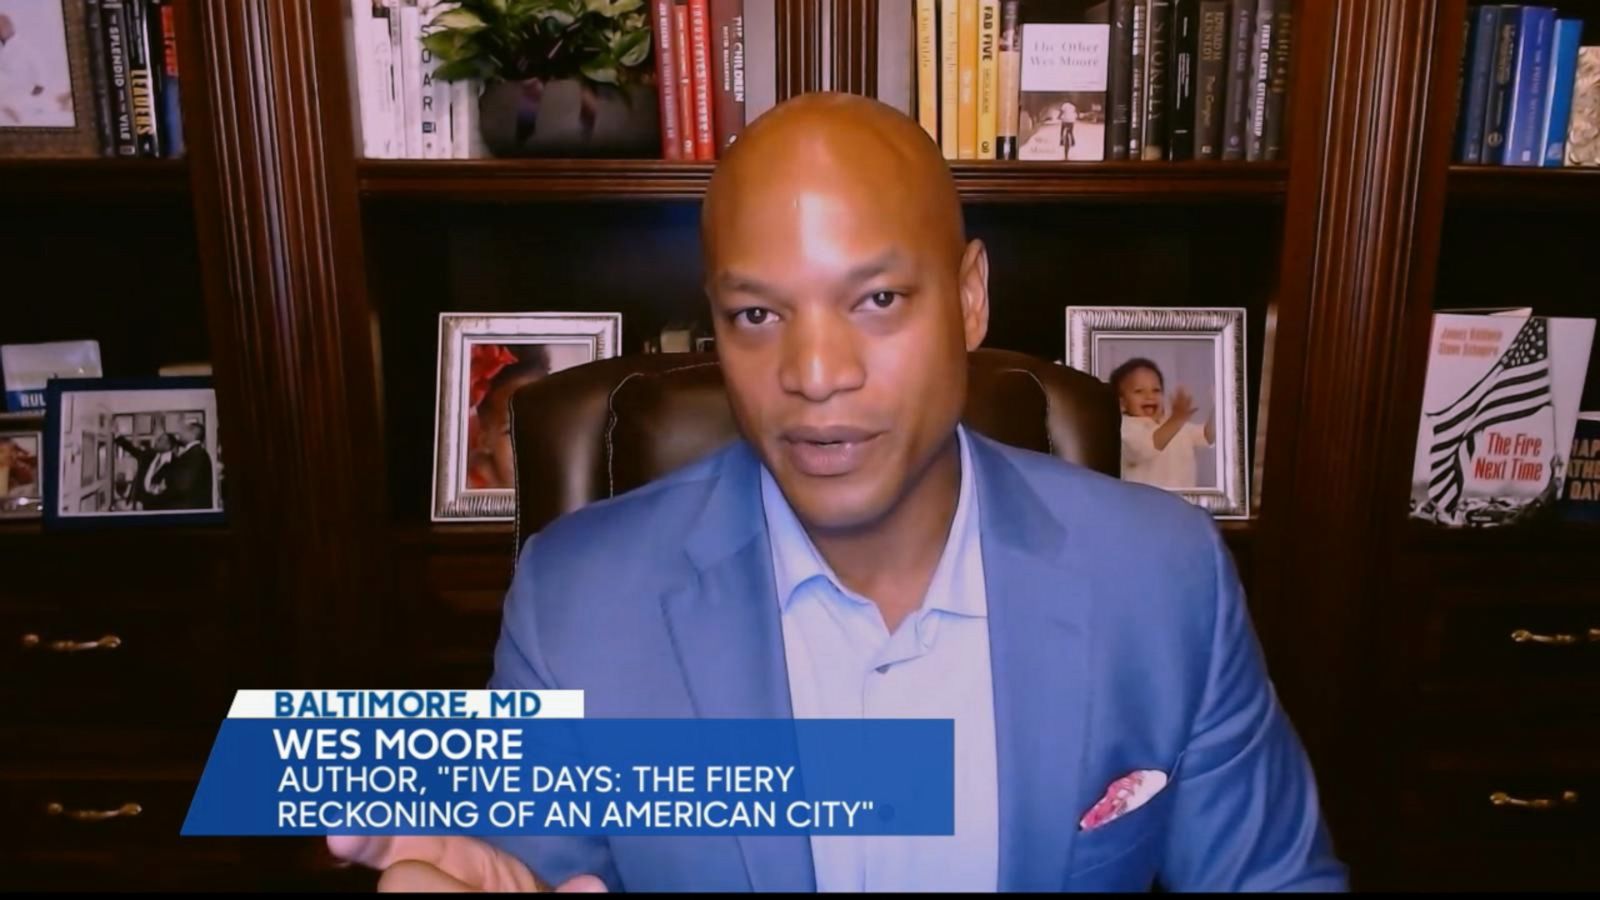 listen to the other wes moore online free